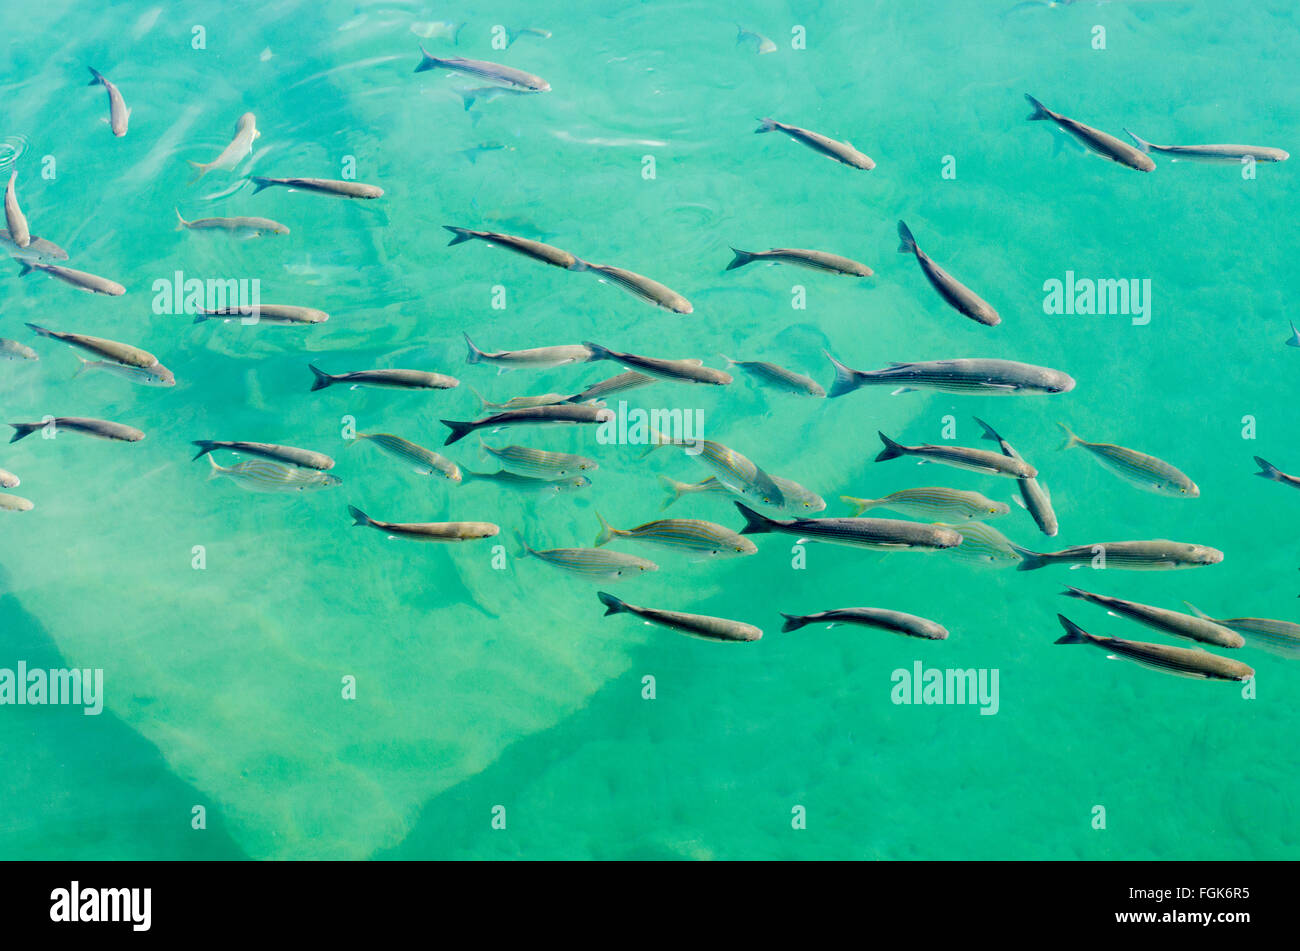 Shoal of small fish in the in clear water of the harbour Stock Photo